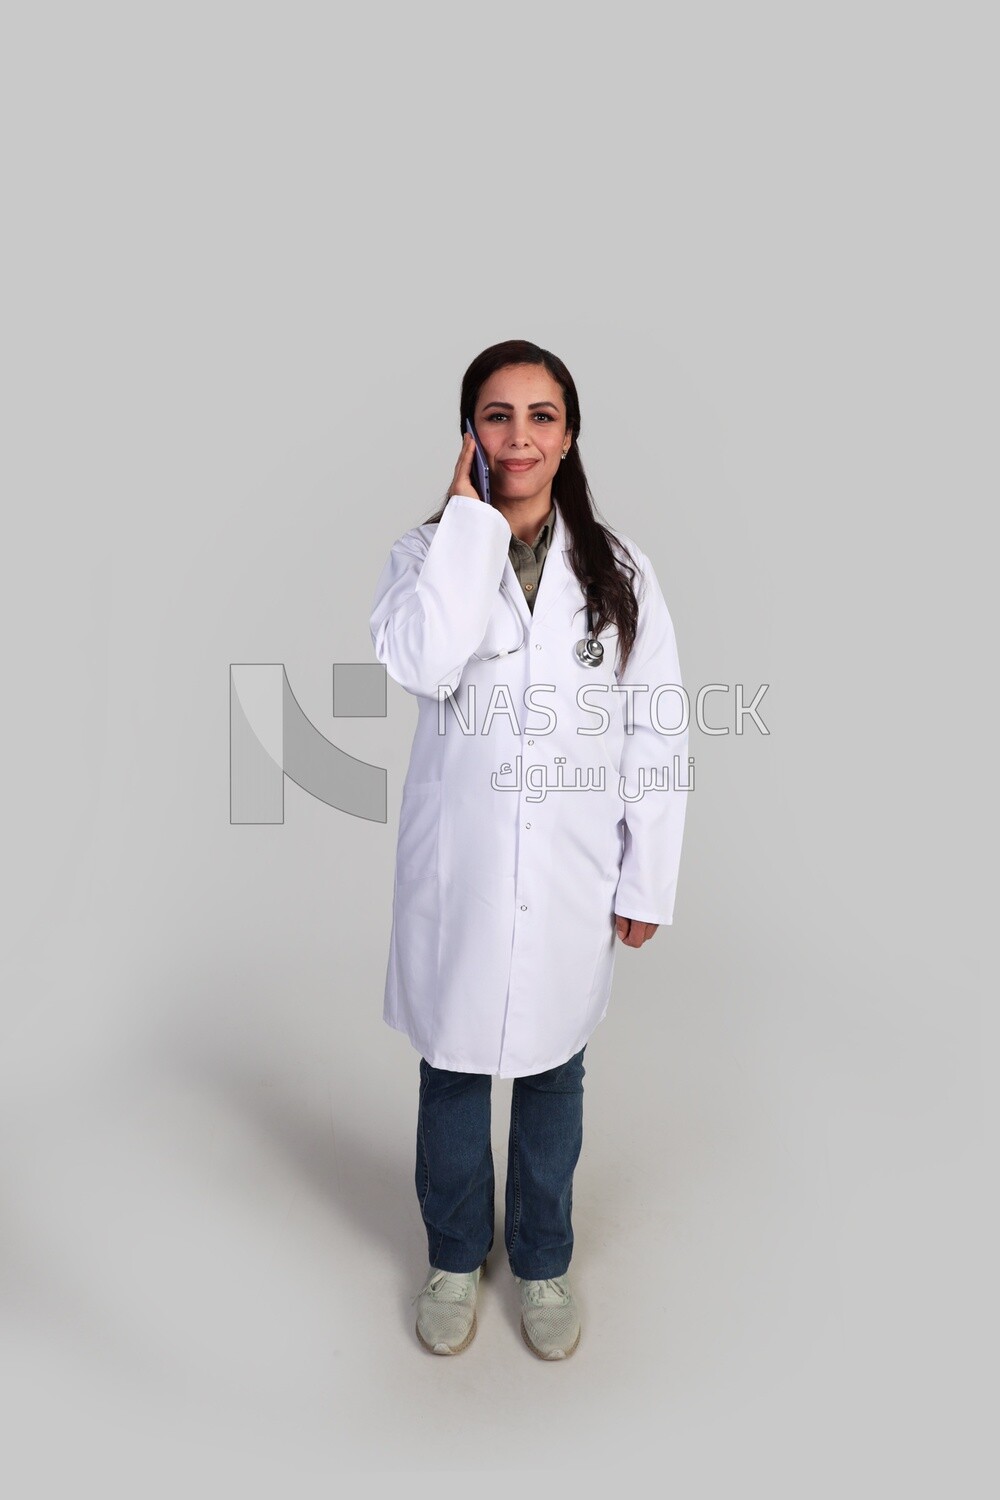 female doctor talking on the phone